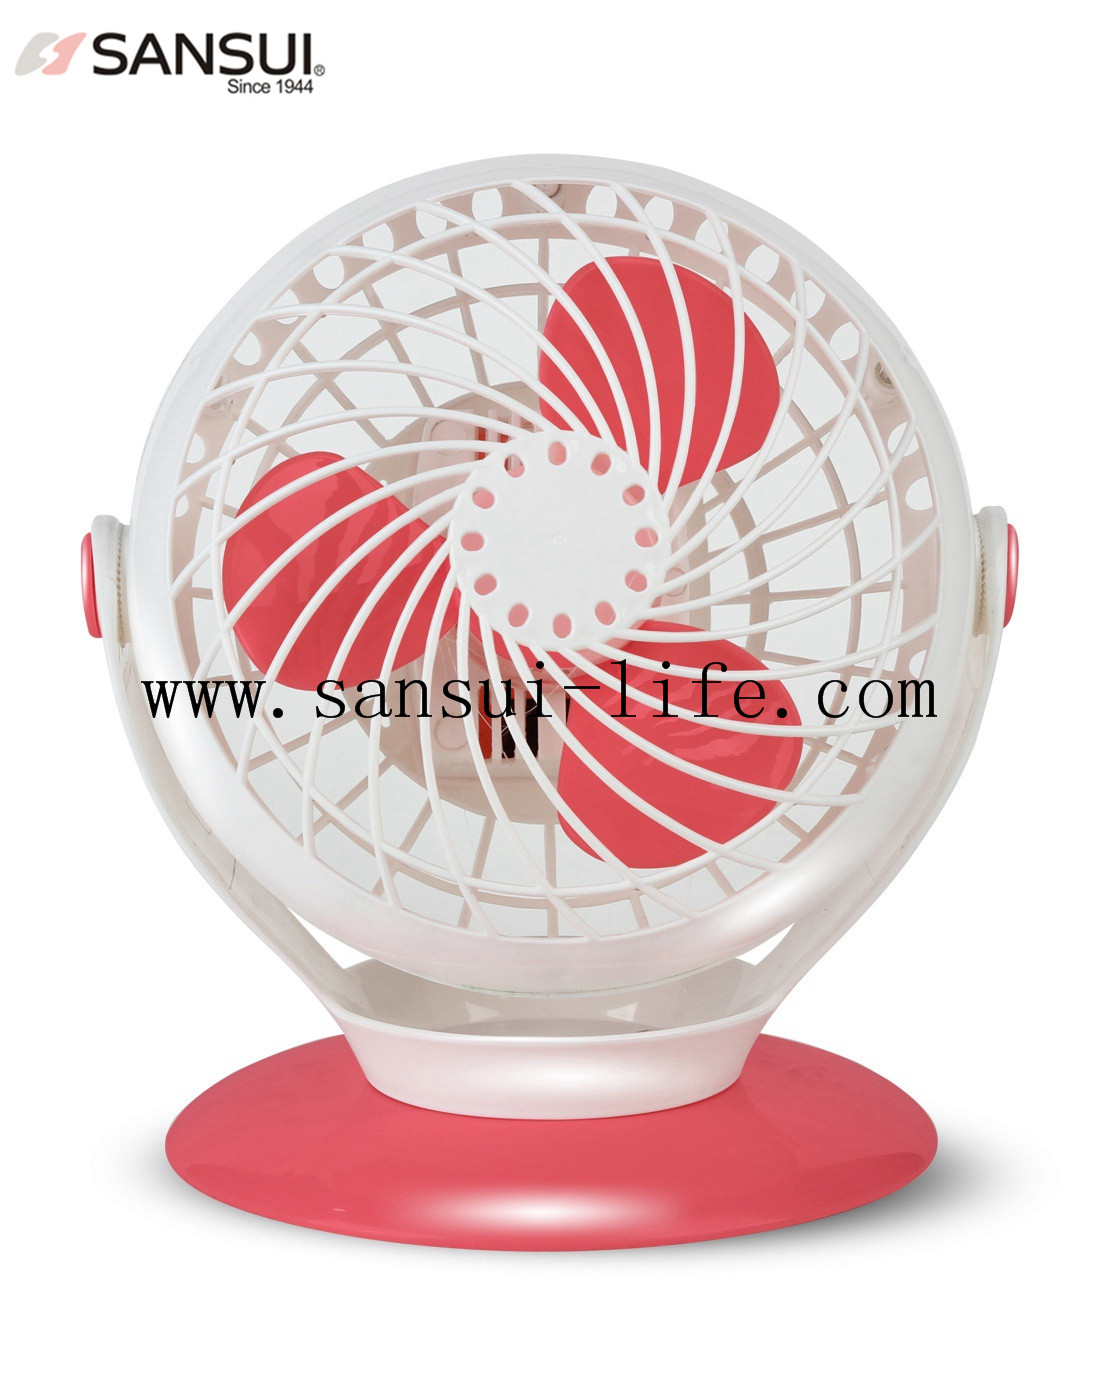 SANSUI USB6 inch Shrimp color small fan, three color for choice, mute electric table fan